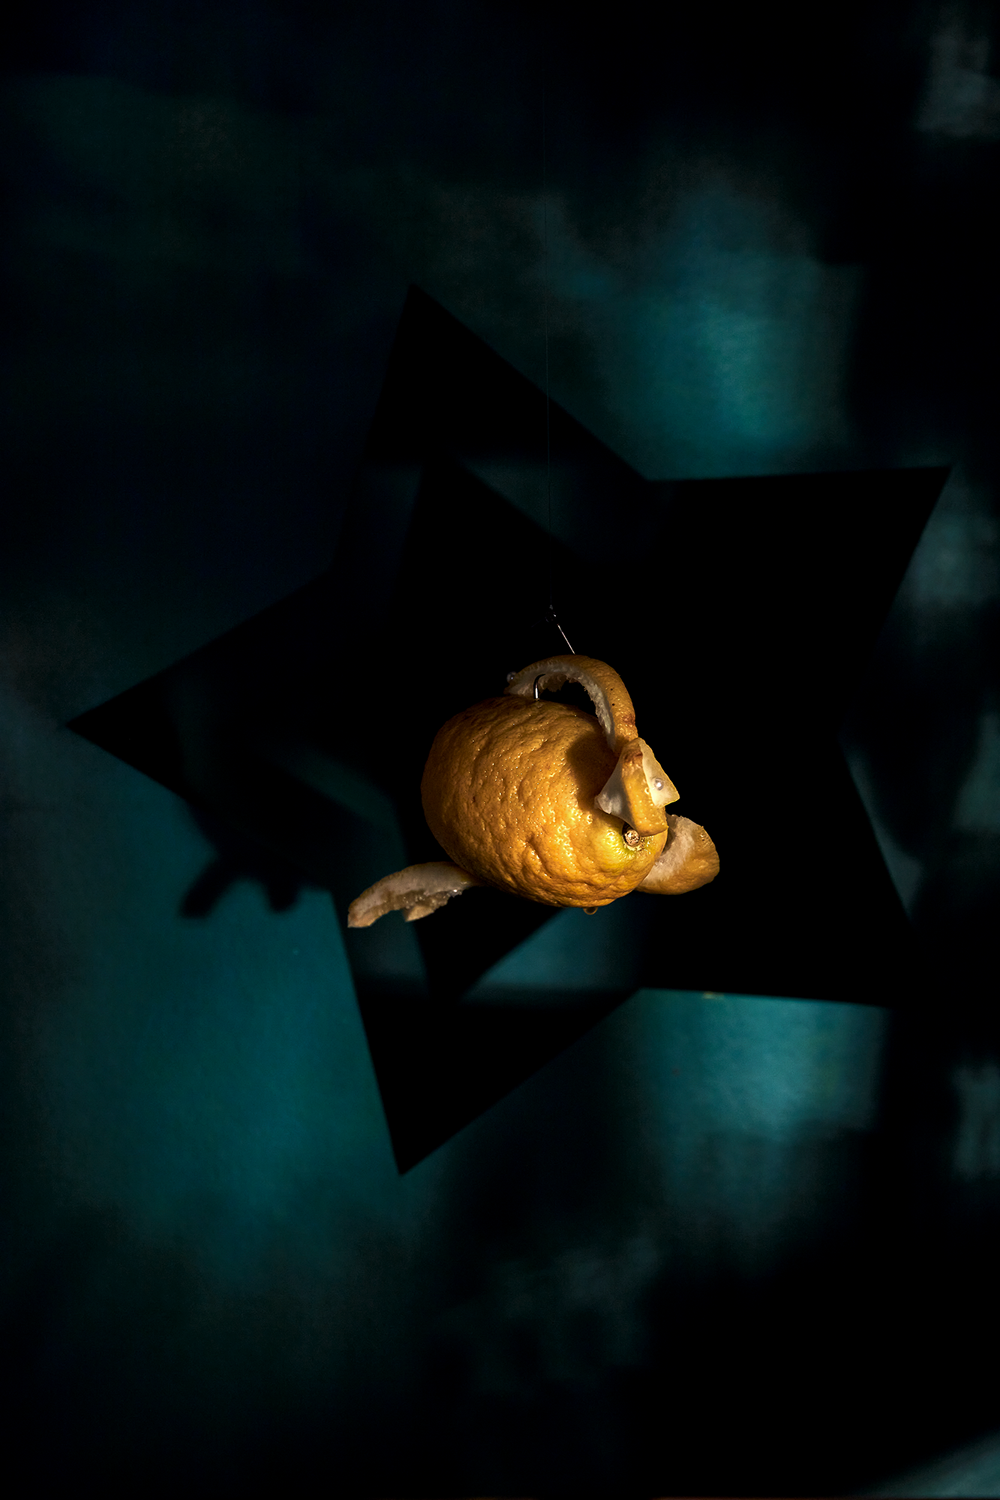 Colour photograph of lemon with cut bit of lemon attached on the side. Lemon hangs in a teal star with dappled light.